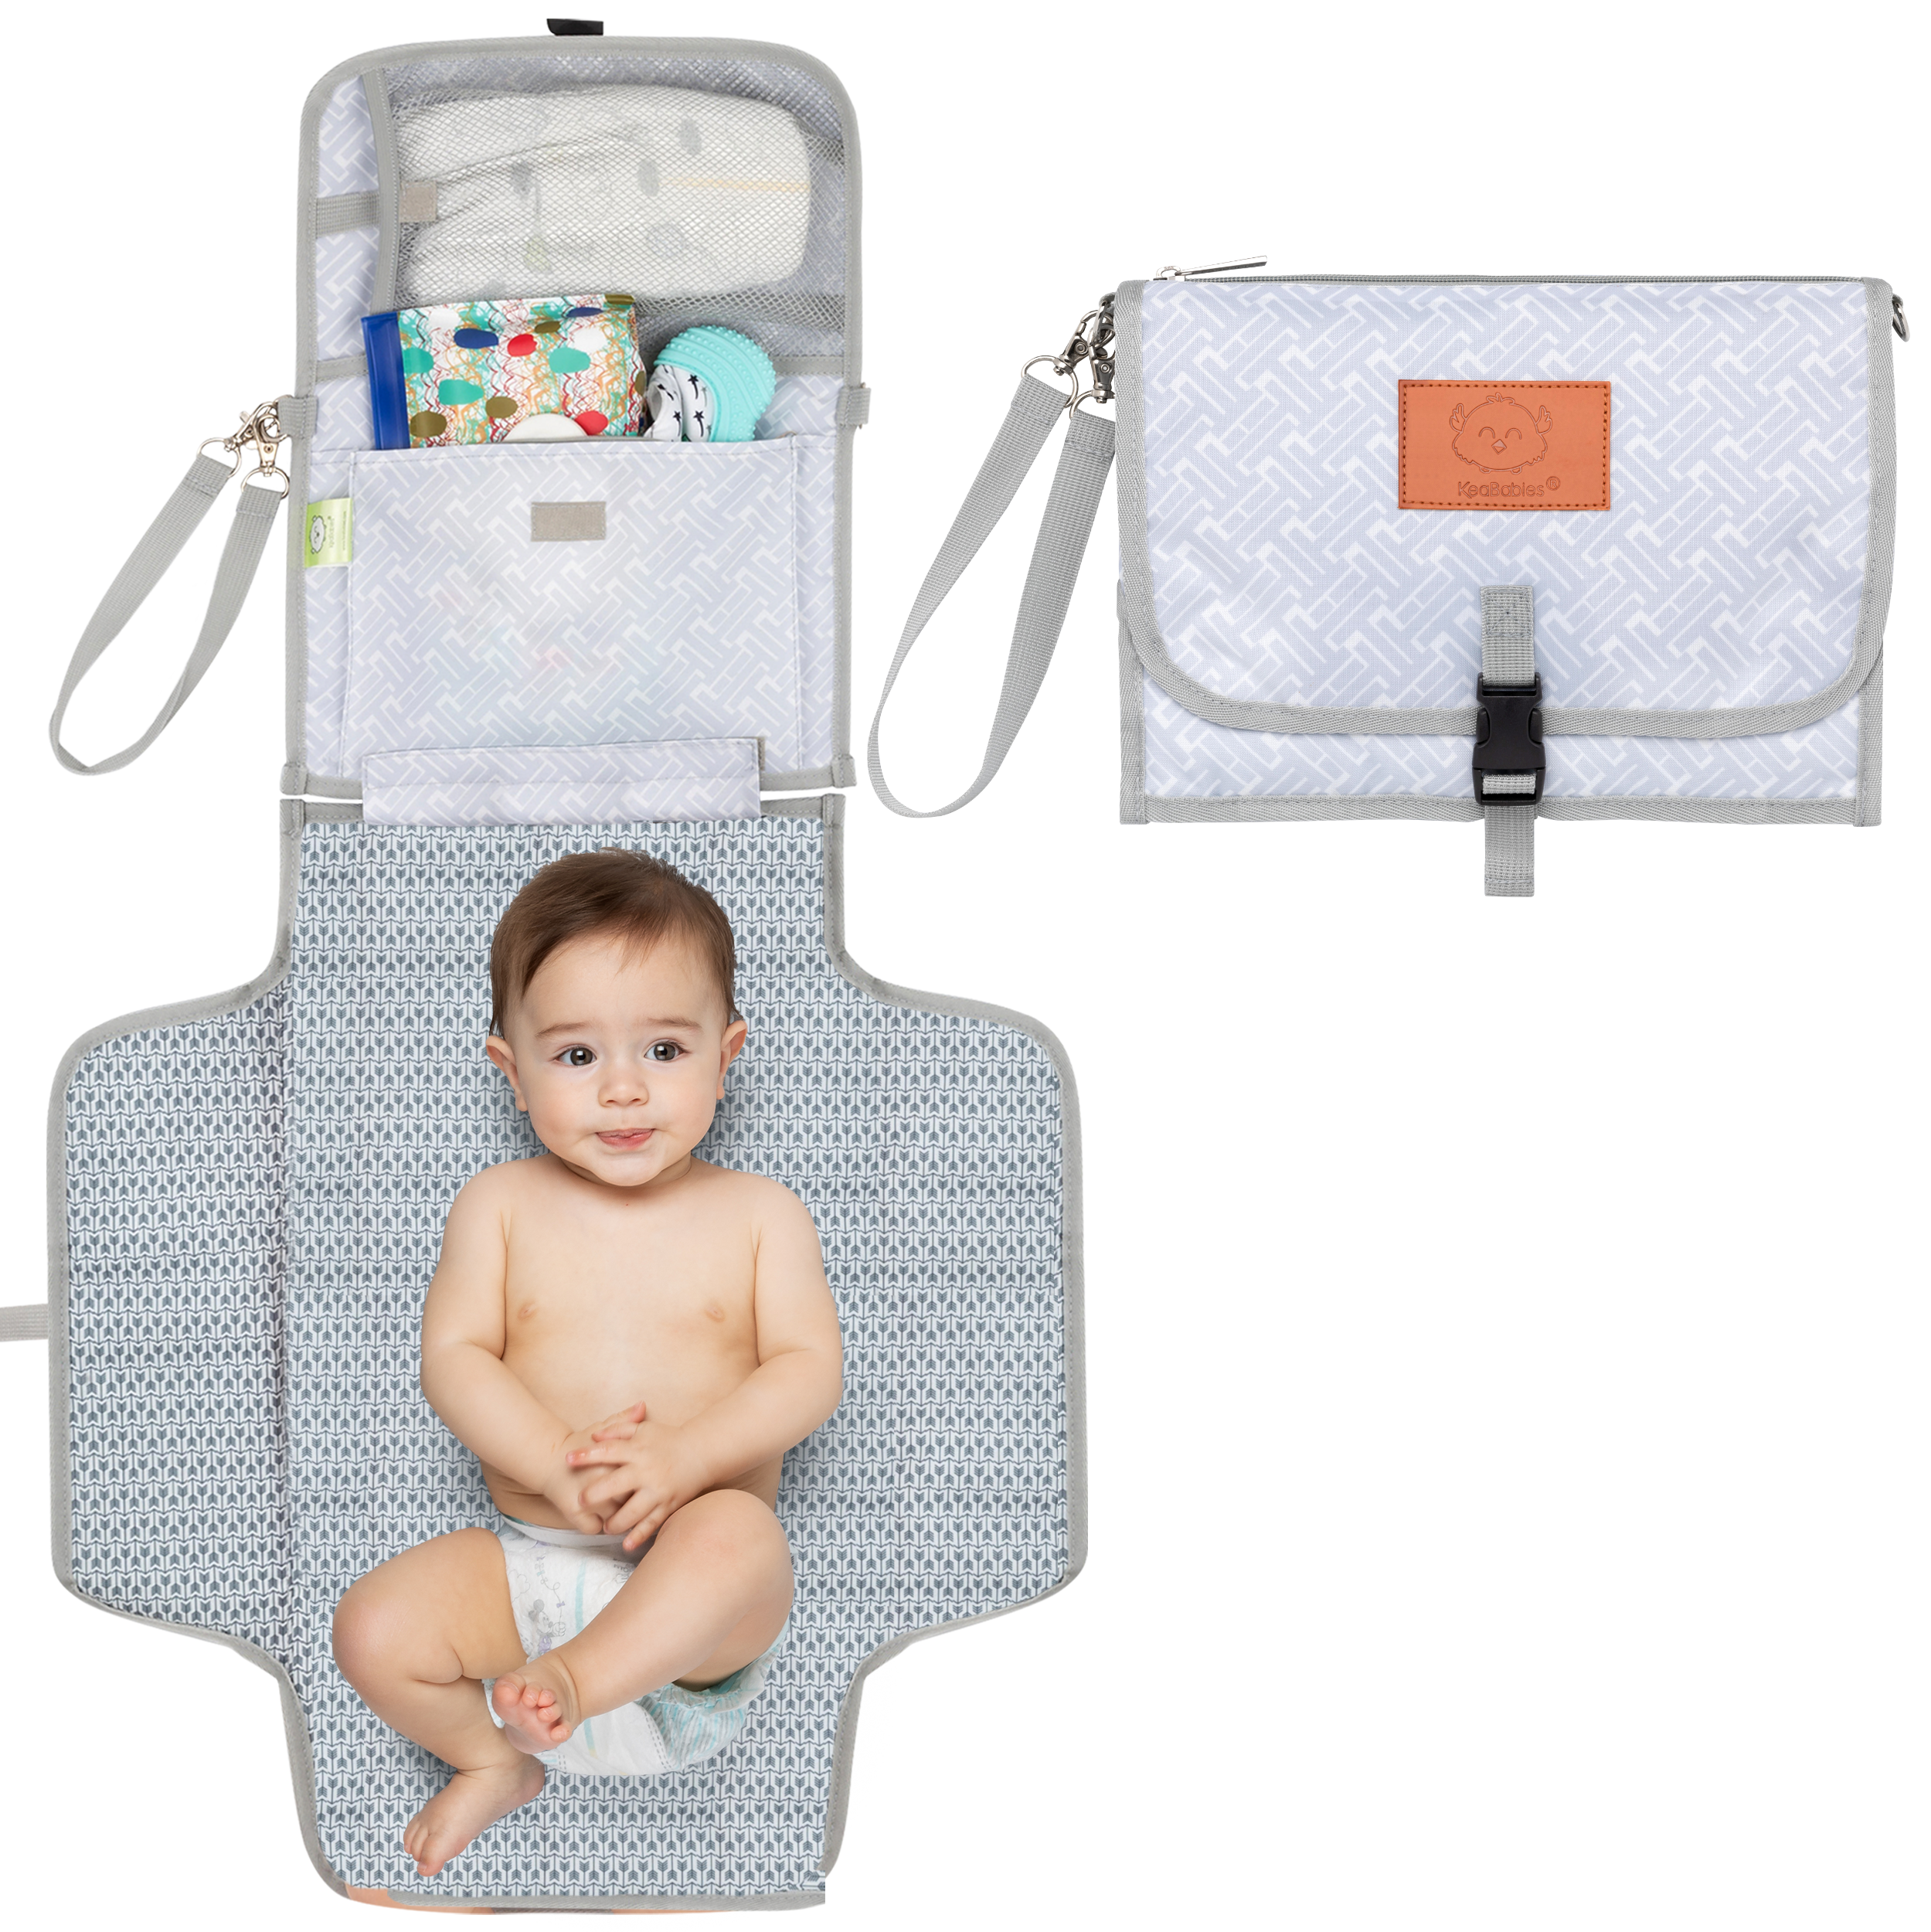 Baby Travel Changing Mat Wipe Clean Waterproof Soft Padded Portable Foldable 